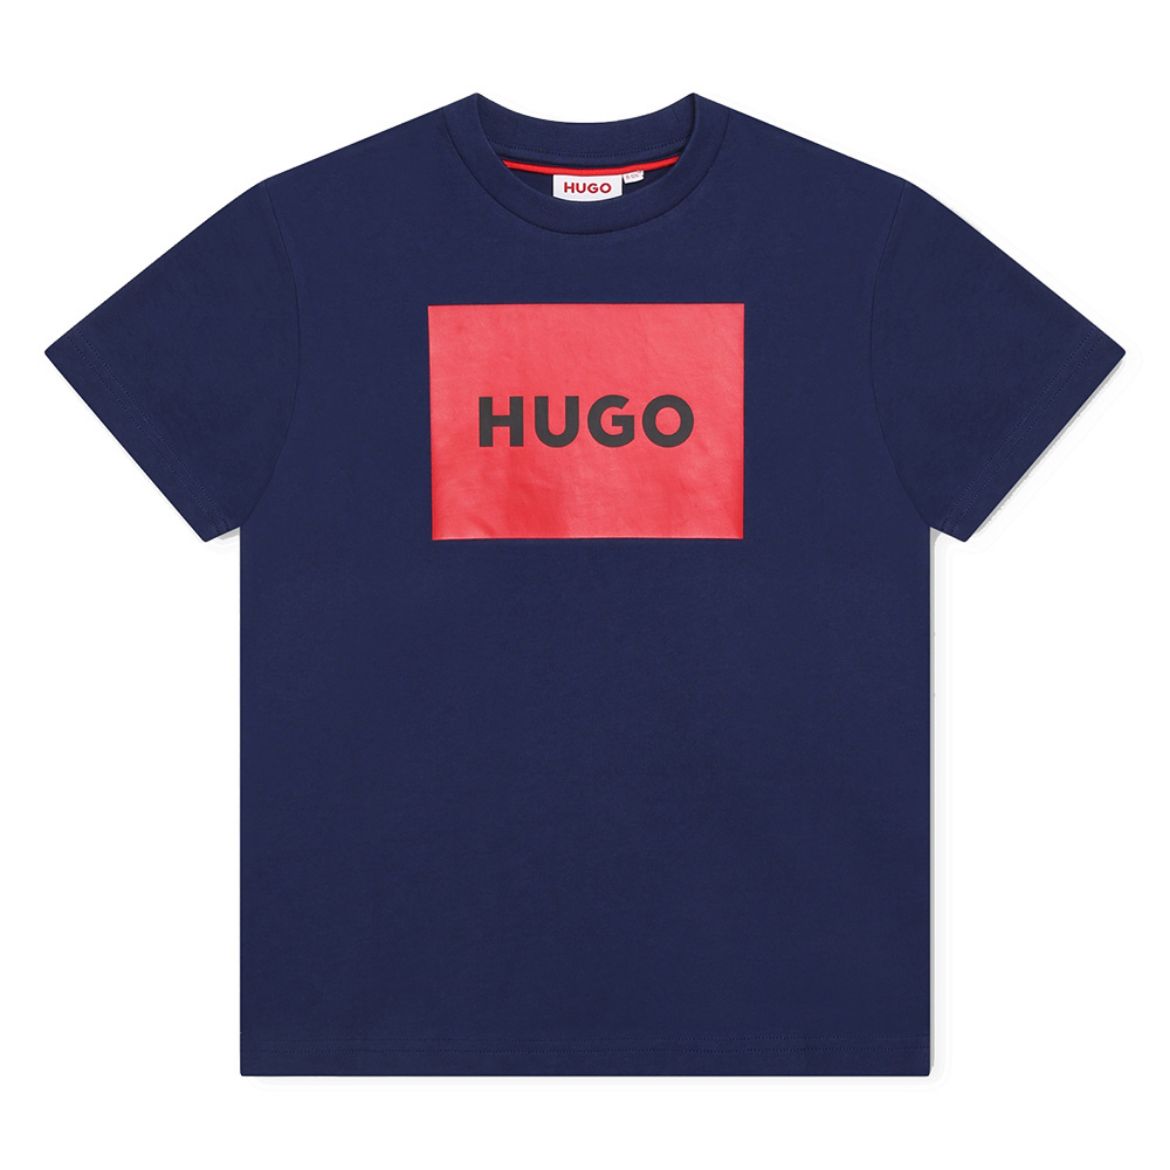 Picture of Hugo Boys Navy T-shirt